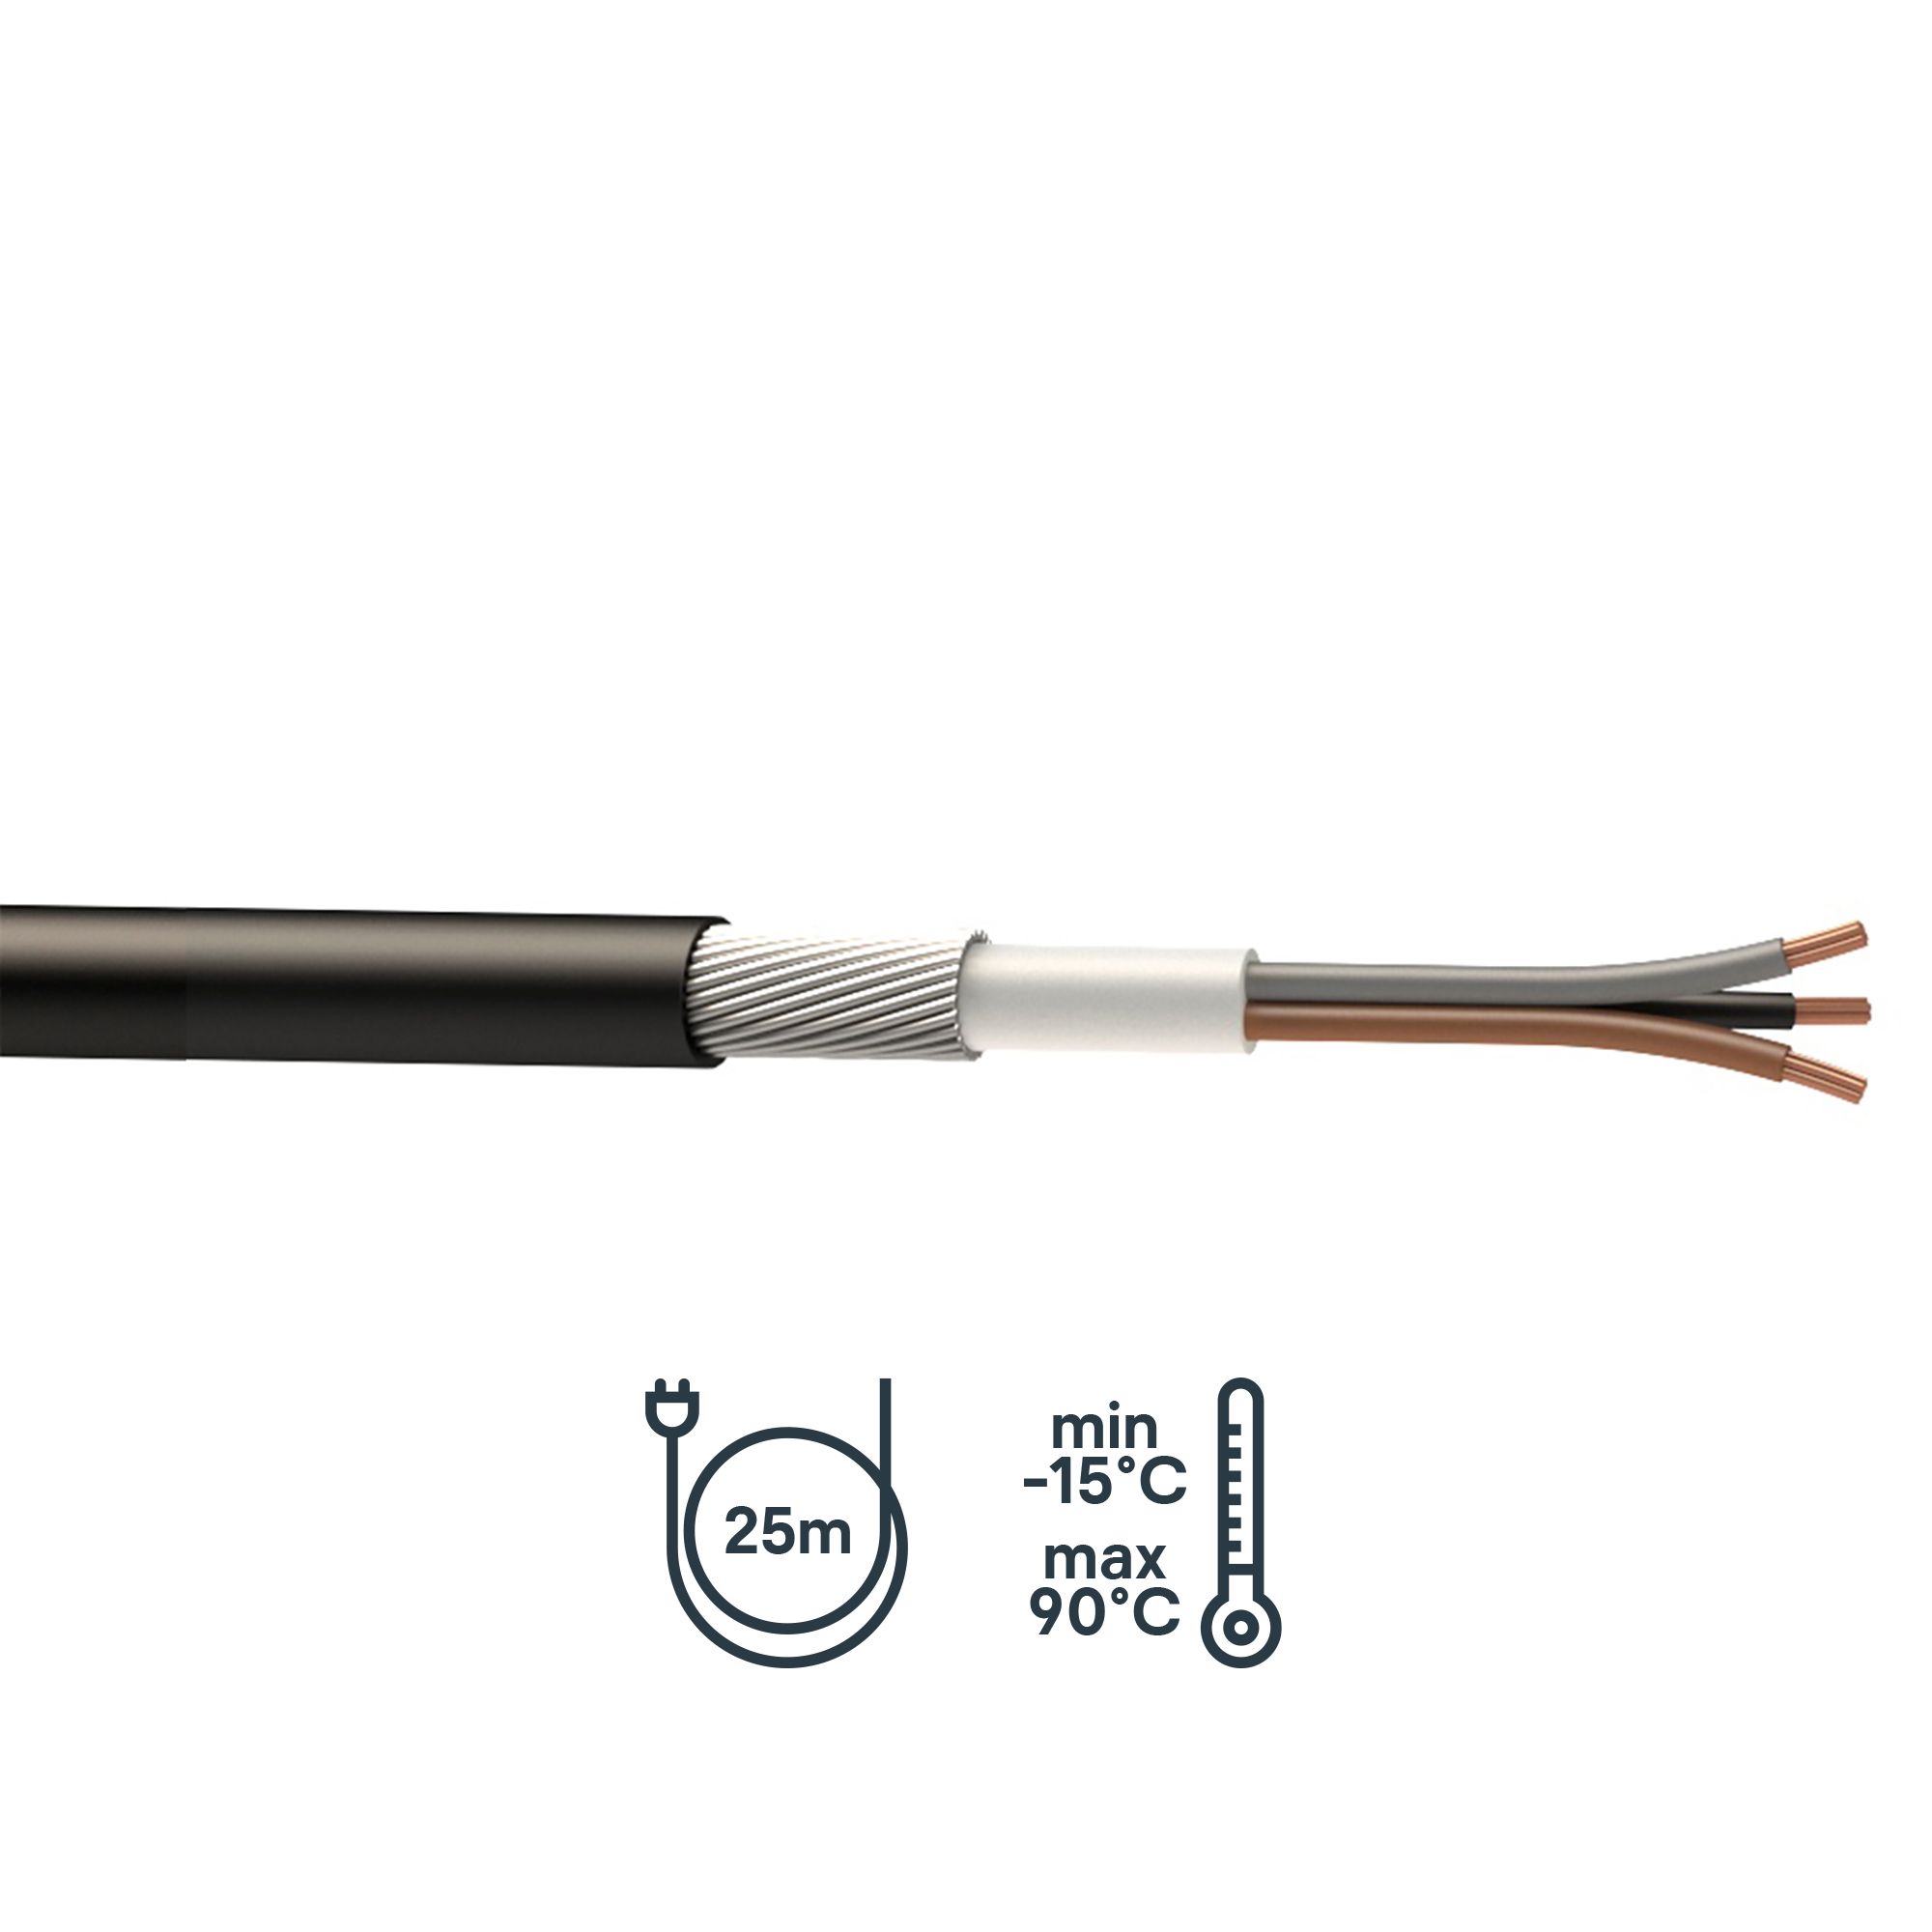 Prysmian 6943X Black 3-core Armoured Cable 4mm² x 25m